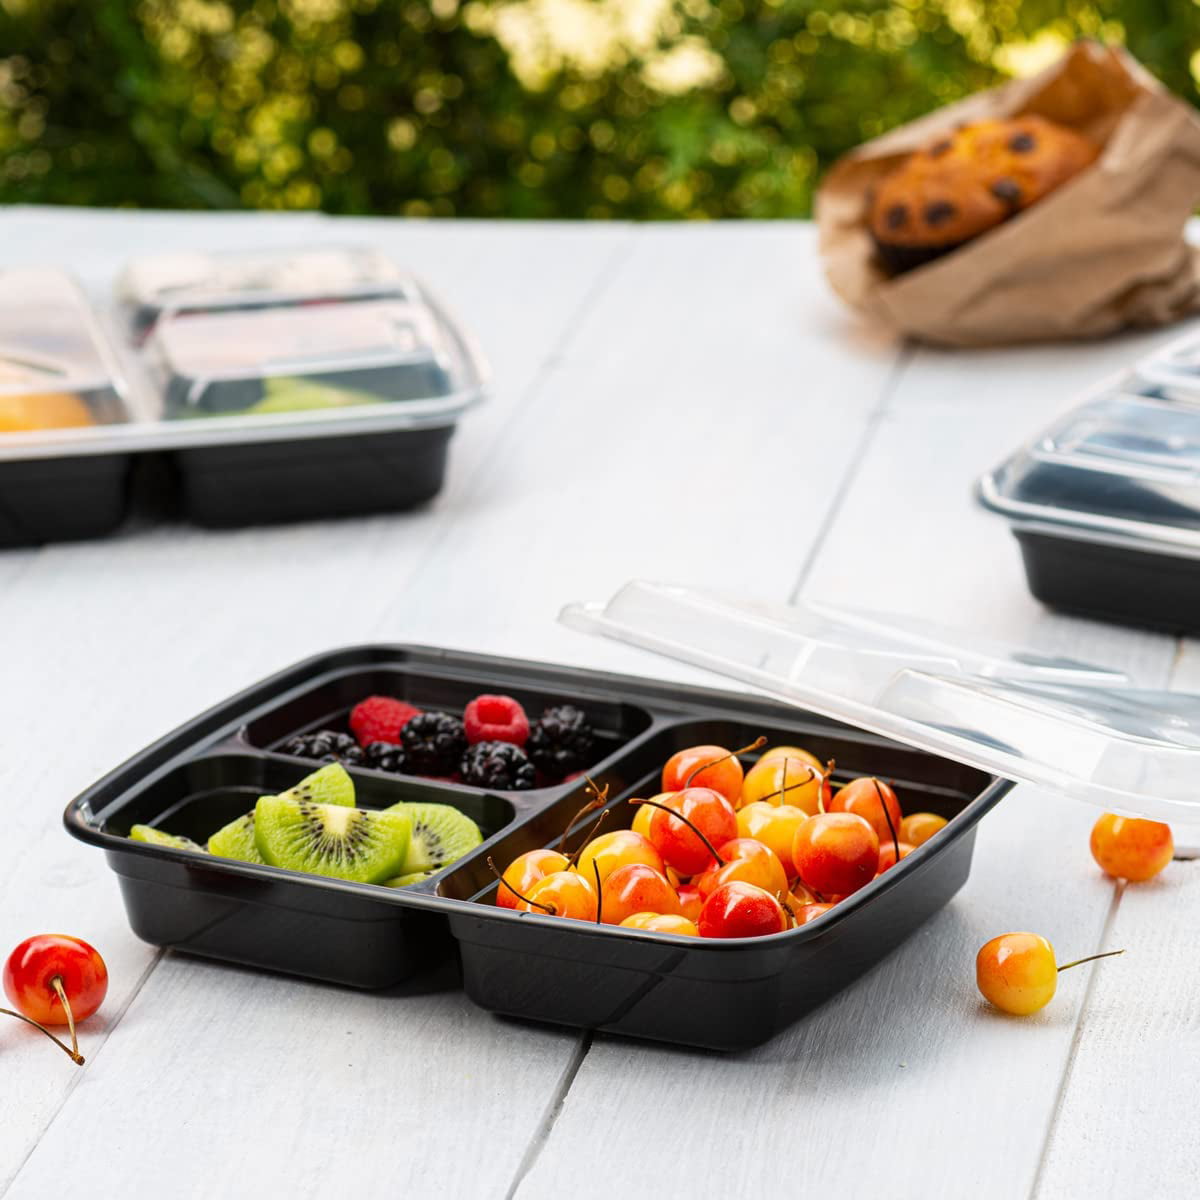  OTOR Bento Boxes Meal Prep Containers 3 Compartments with Clear  Airtight Lids Food Grade Deli Container Lunch boxes take away Travel  Containers Freezer Safe16oz 25 Sets: Home & Kitchen